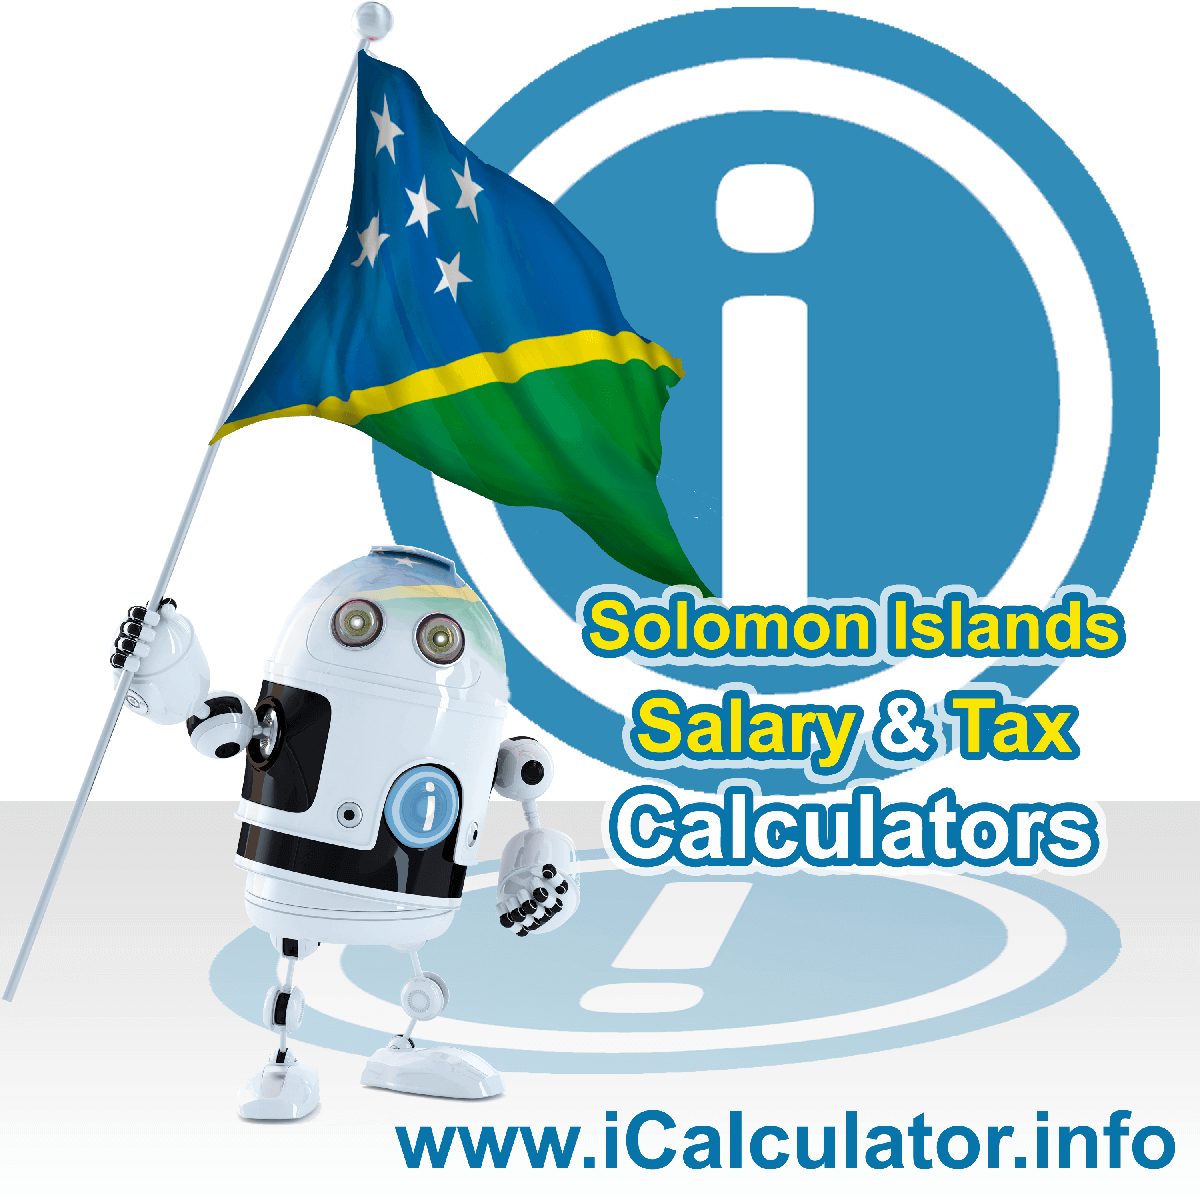 Solomon Islands Wage Calculator. This image shows the Solomon Islands flag and information relating to the tax formula for the Solomon Islands Tax Calculator